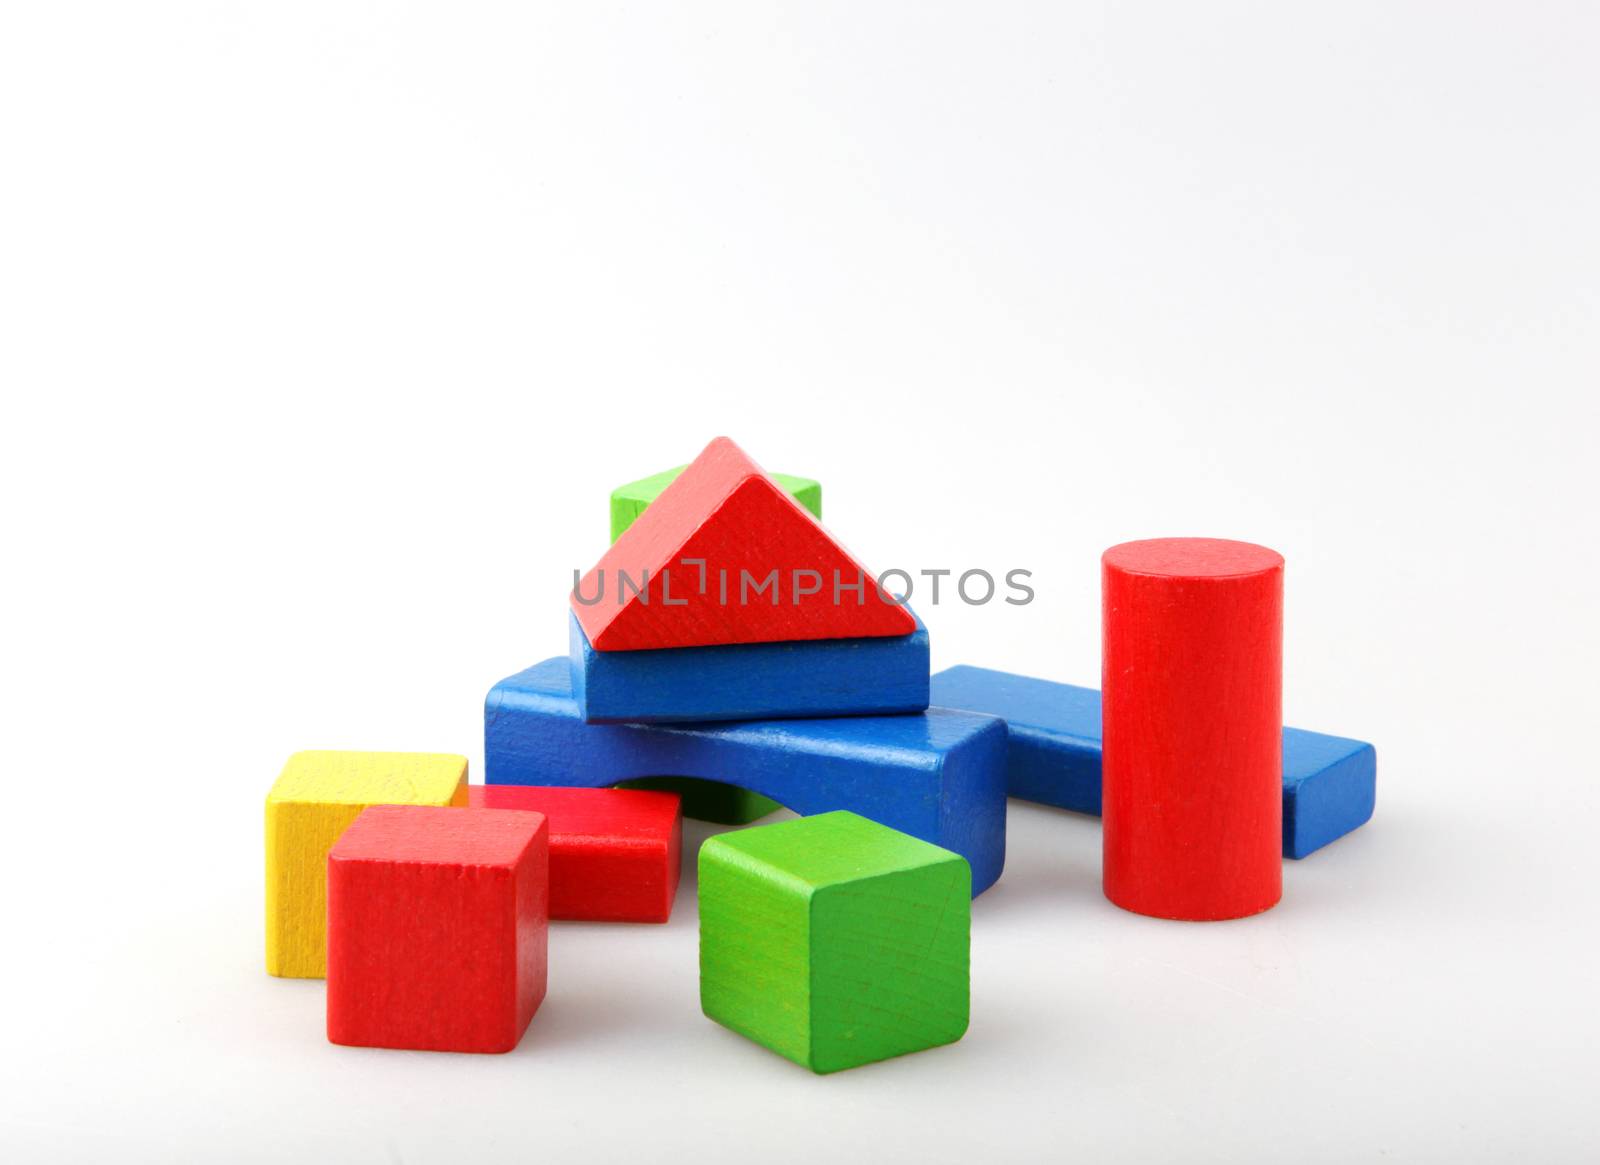 Studio Shot Of Colorful Toy Blocks Against White Background by nenovbrothers